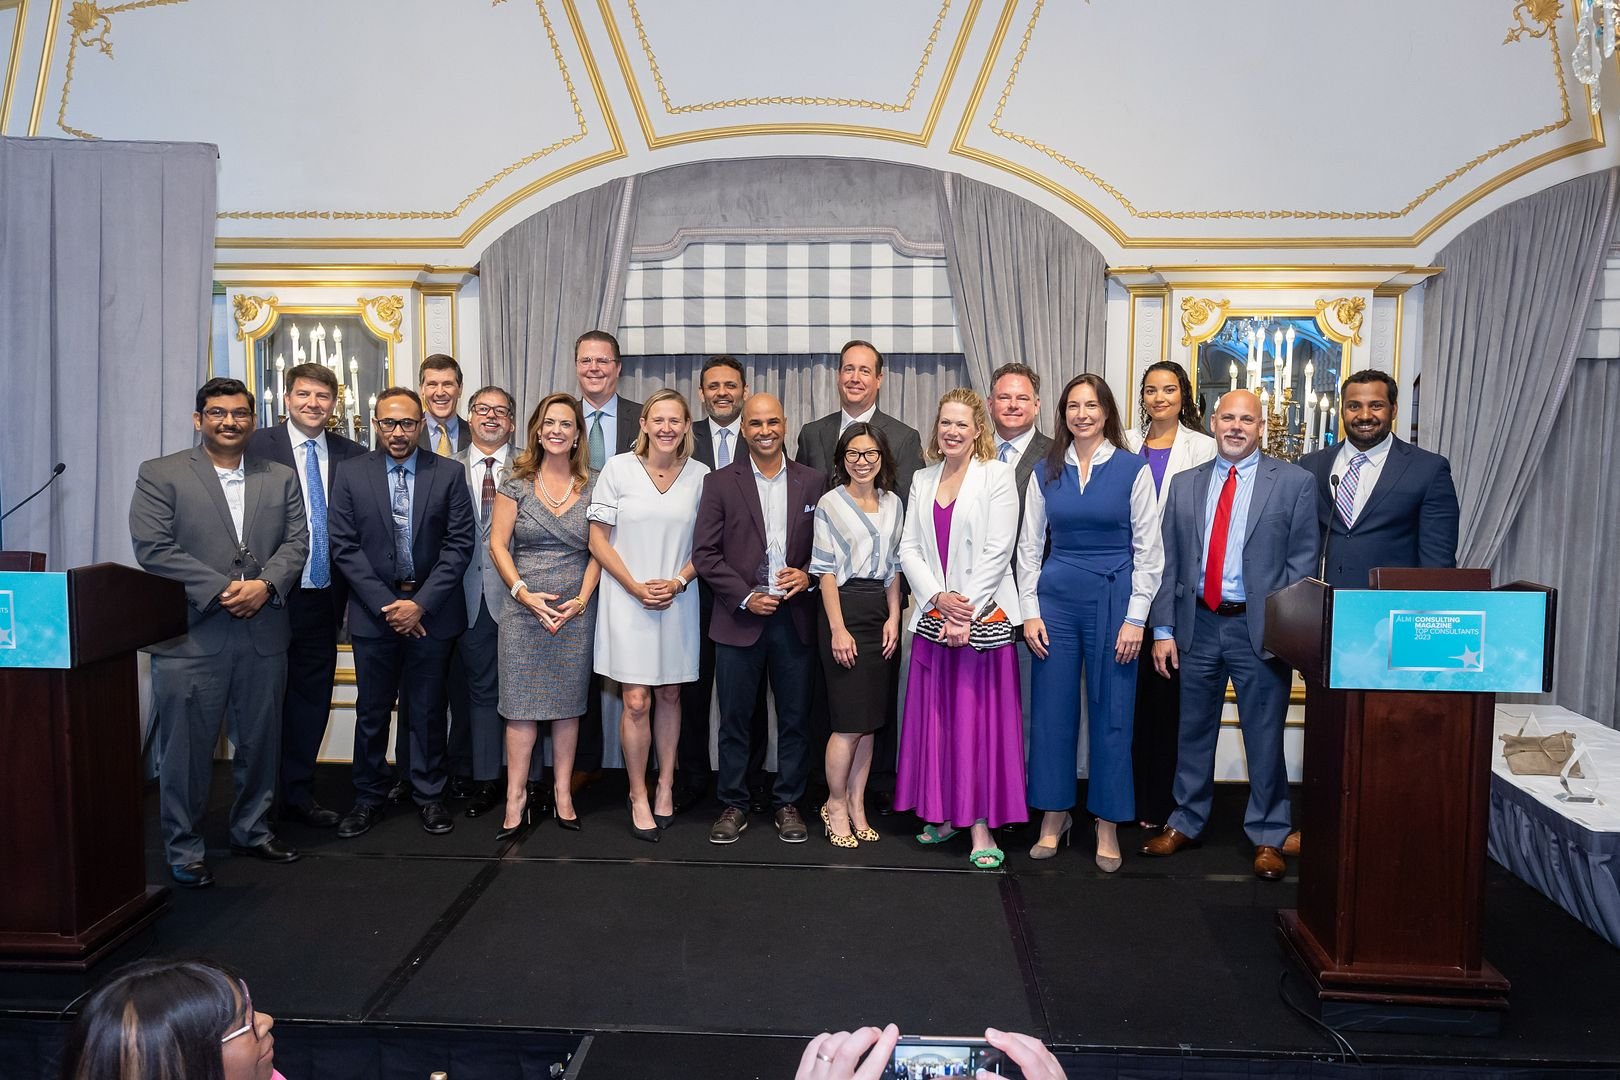 Event Photos! The 2023 Top Consultants Awards